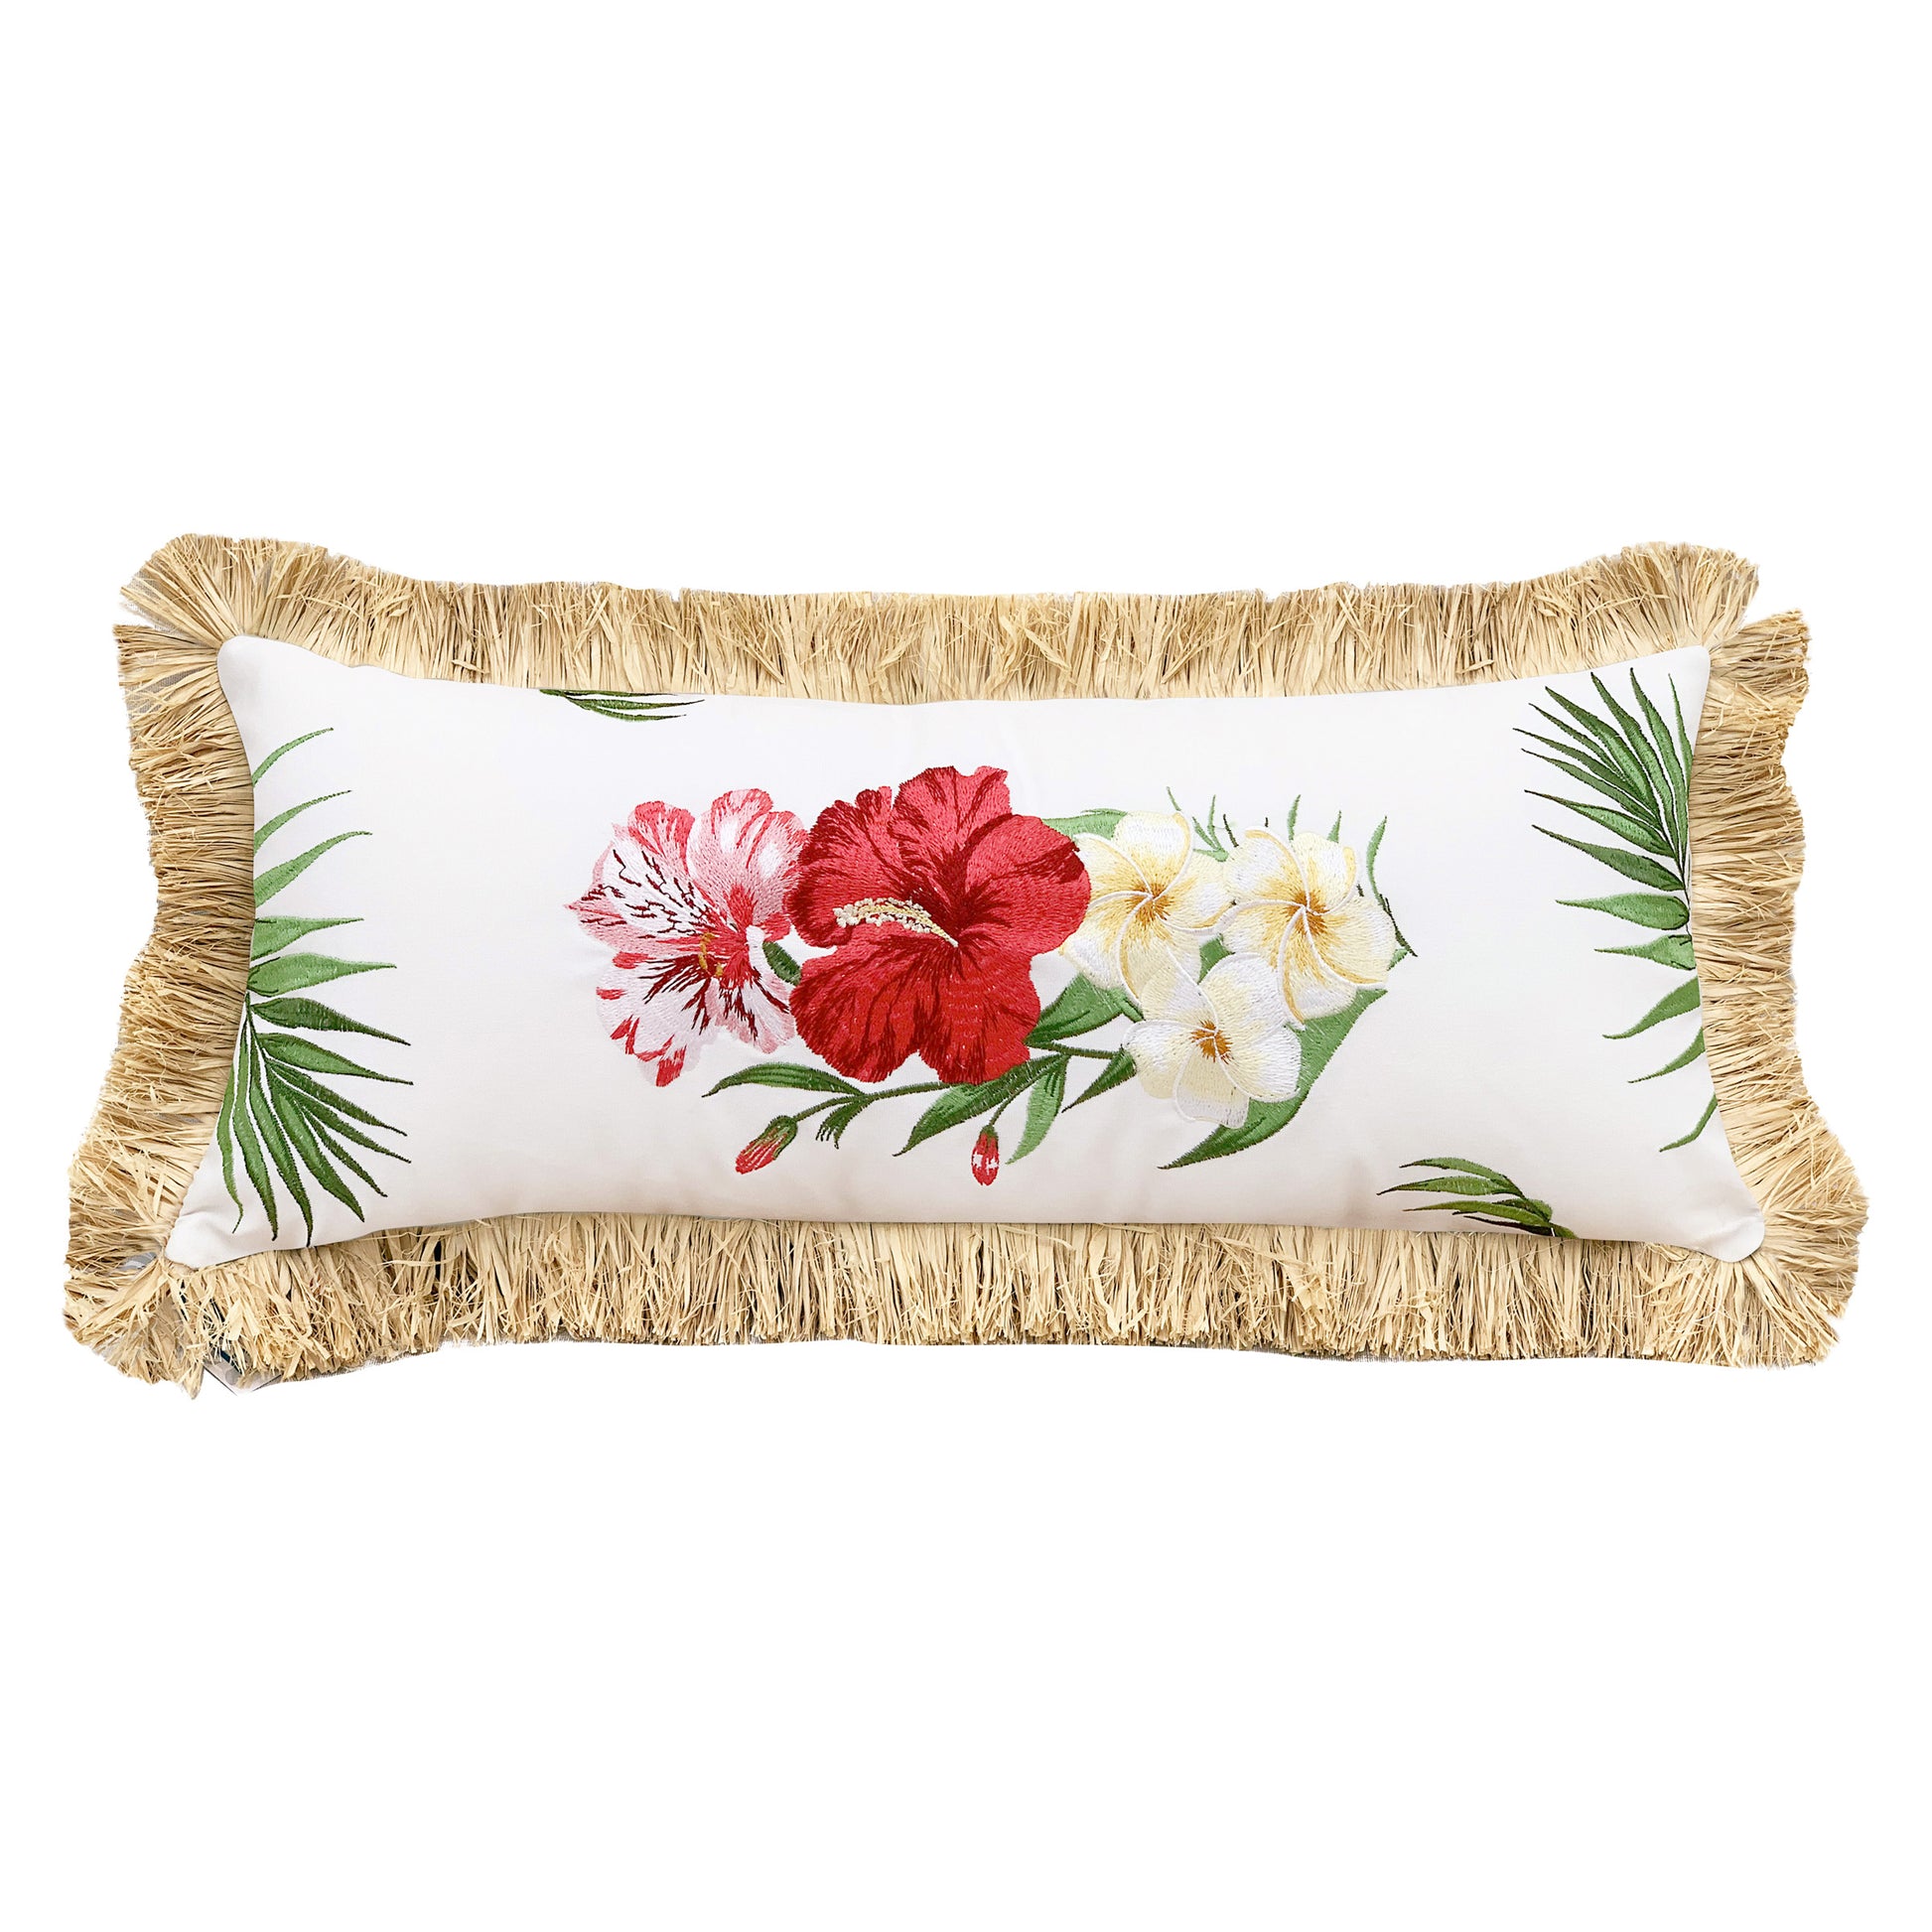 Pink hibiscus and white plumeria flowers embroidered on a white background. Tropical palm leaves frame the pillow in the corners; finished with natural colored fringe that mimics hula skirts.